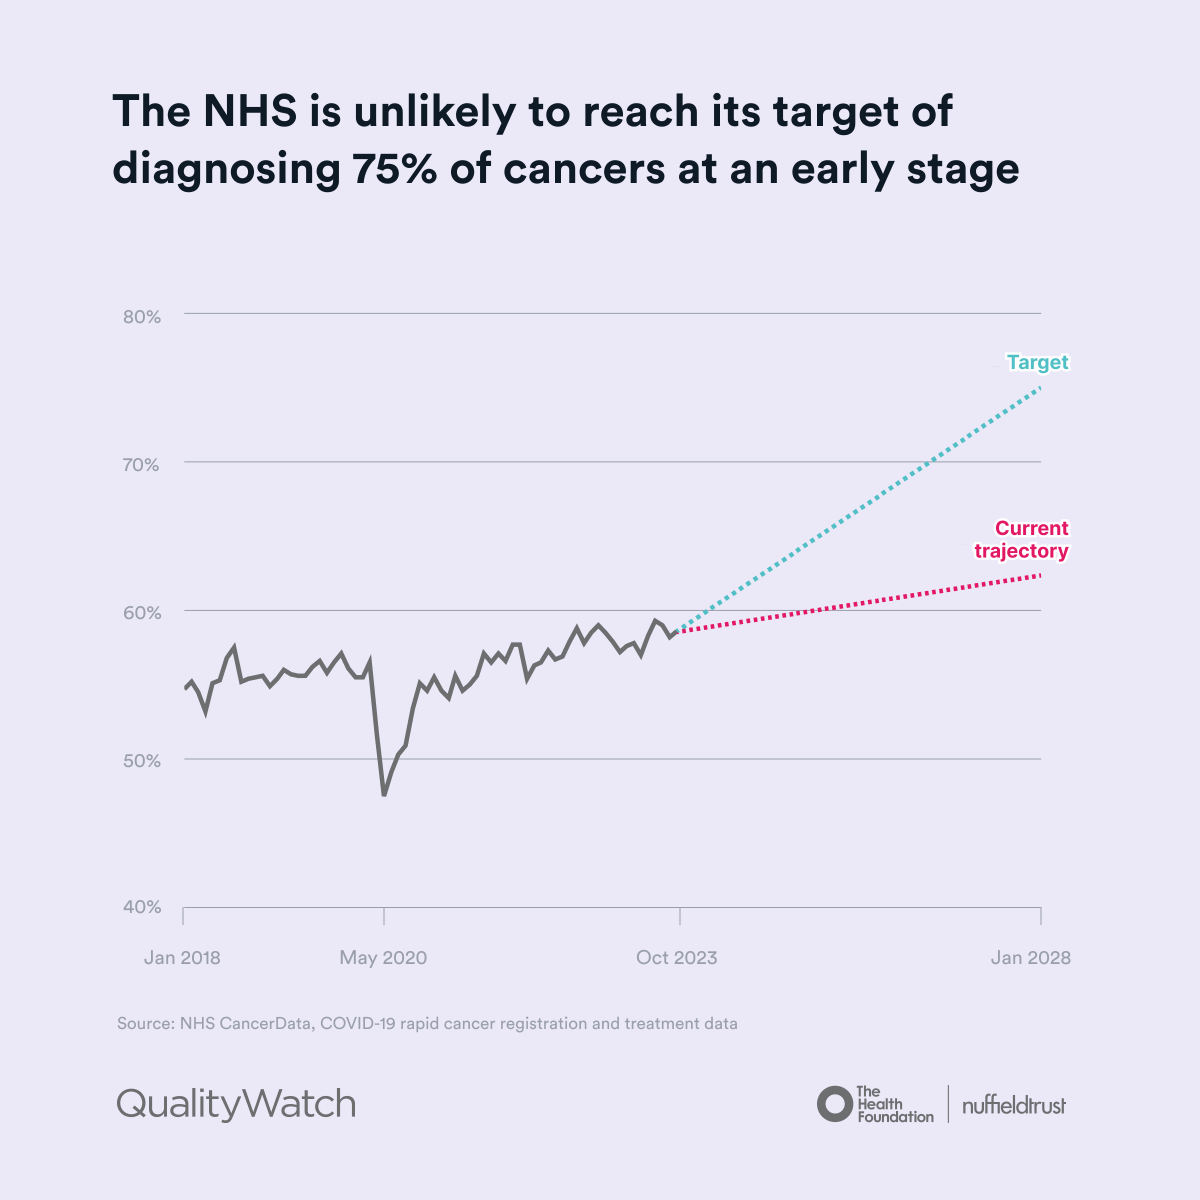 It’s well known that diagnosis at an early stage of #cancer dramatically increases chances of survival, but the #NHS looks set to miss its target to have 75% of cancers diagnosed at an early stage by 2028. Find out more: files.nuffieldtrust.org.uk/qualitywatch/c…